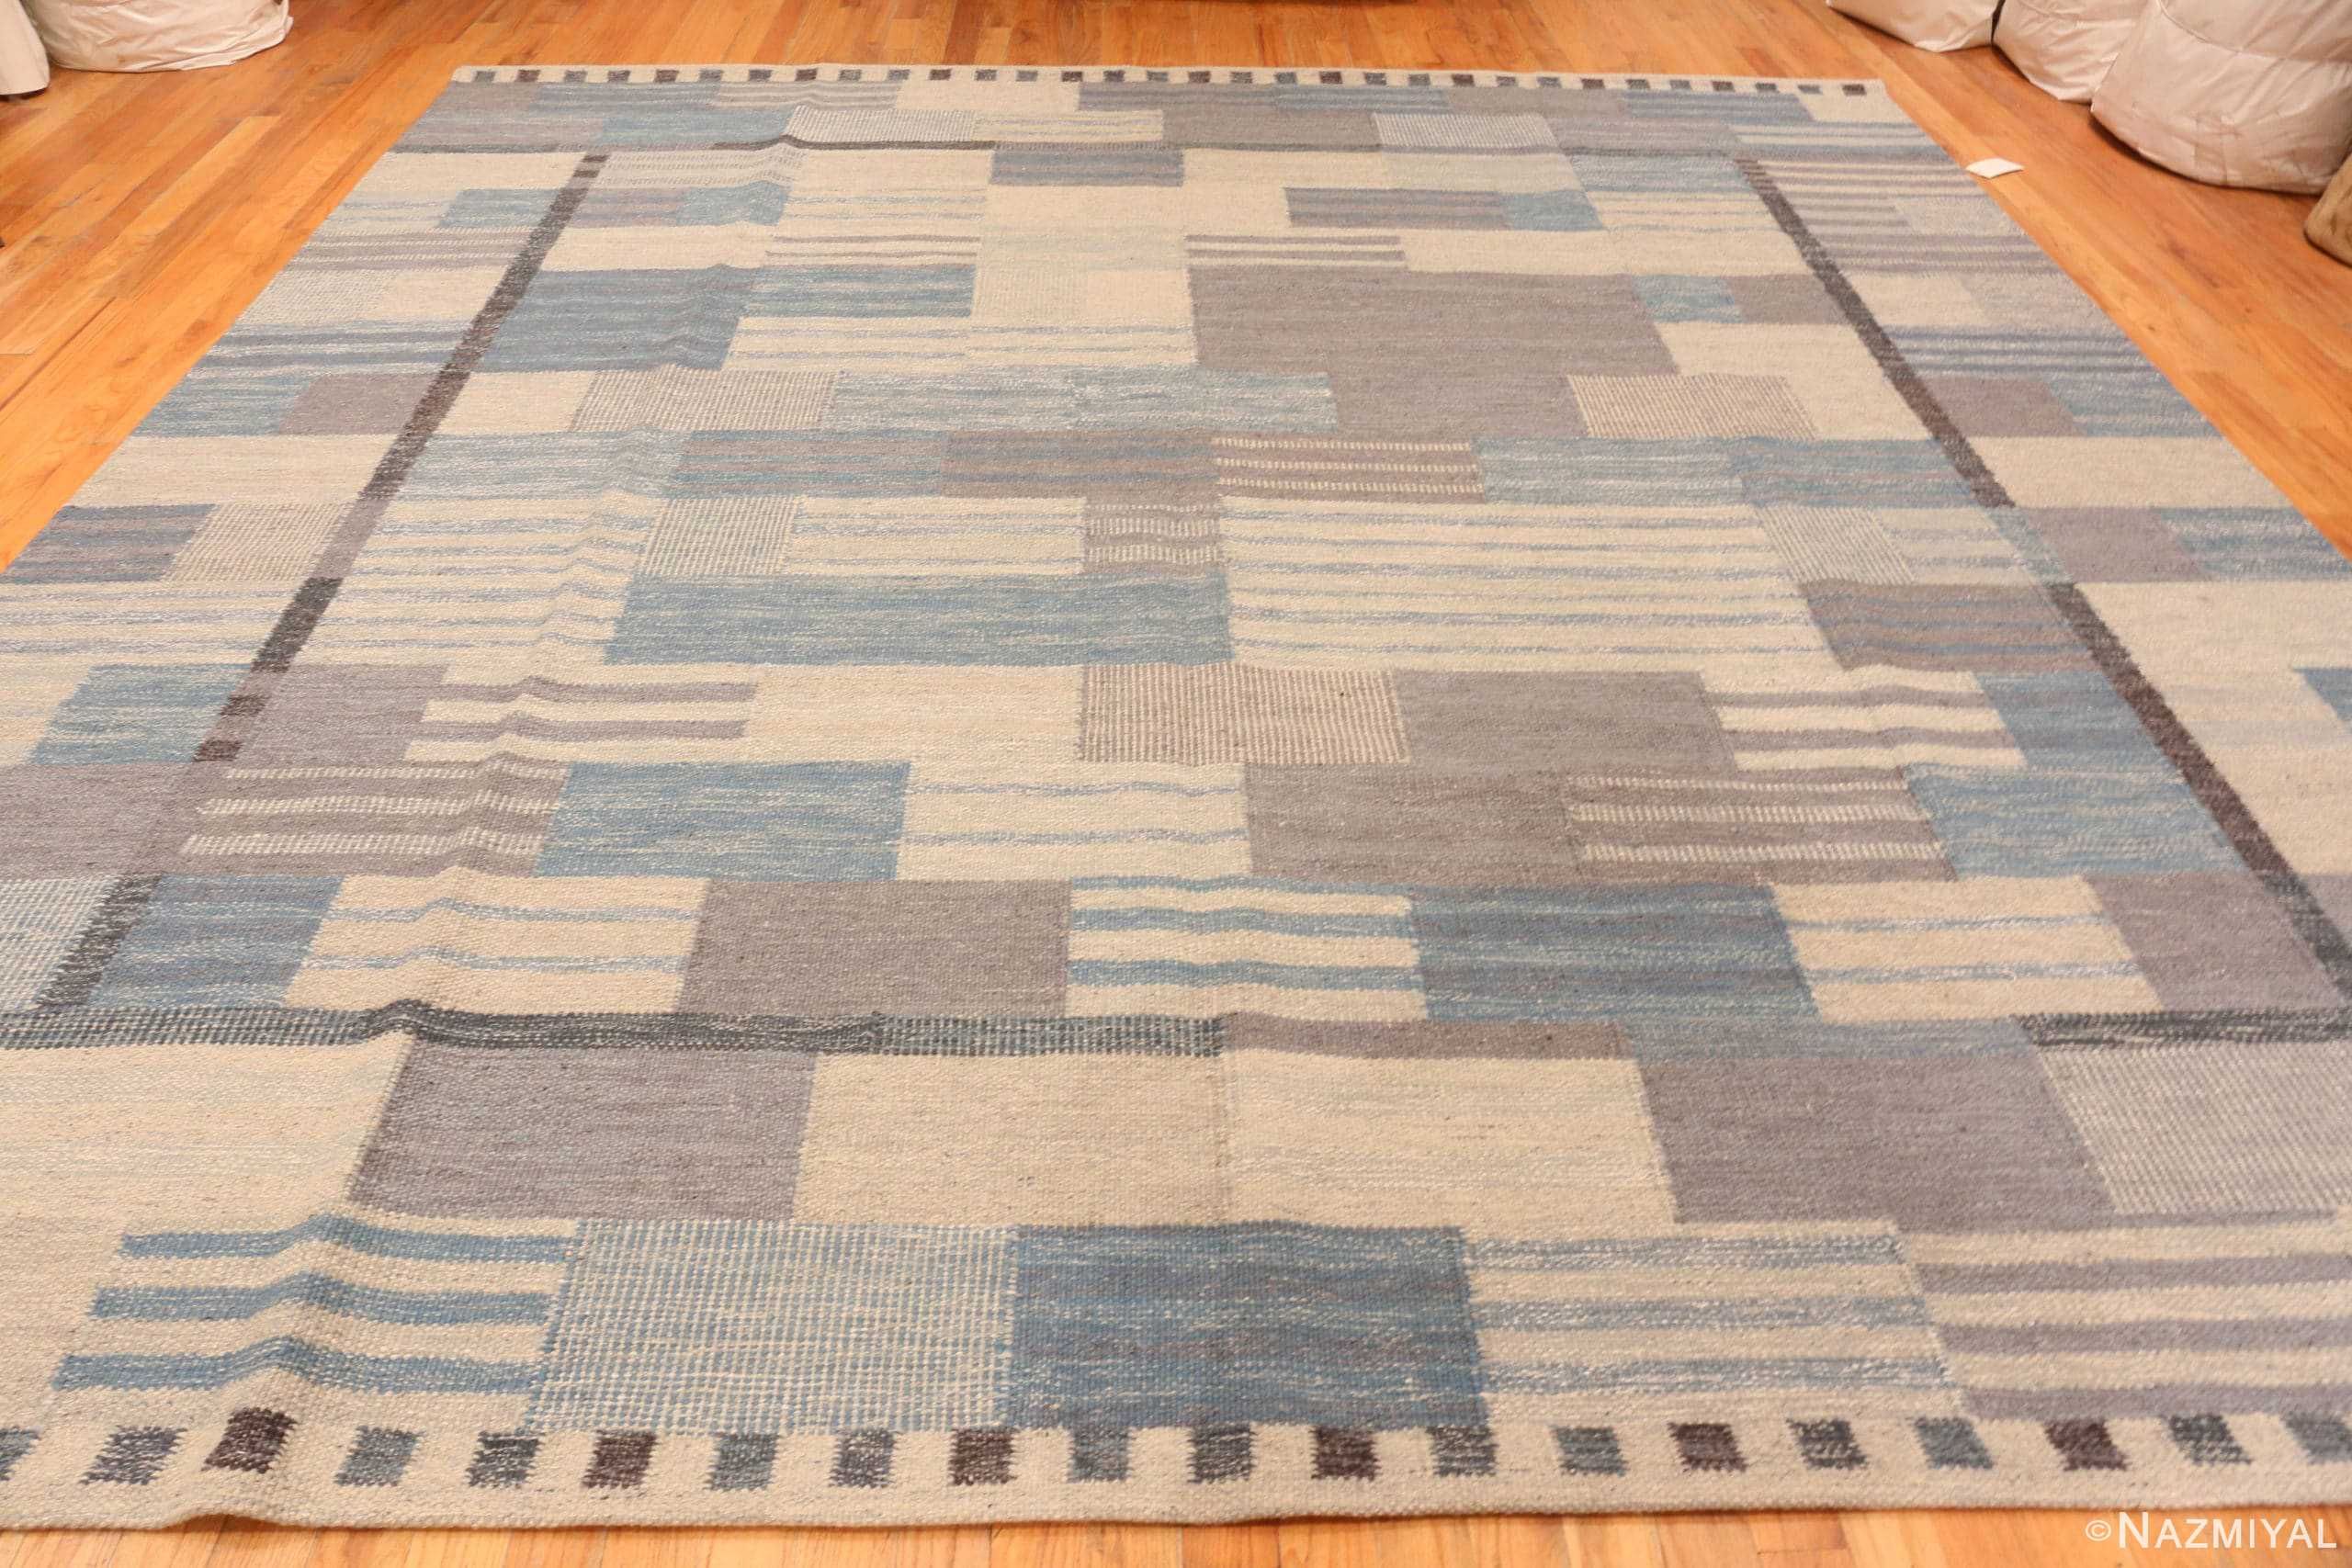 Square Modern Swedish Inspired Kilim Rug 60897 Nazmiyal Antique Rugs In Modern Square Rugs (View 11 of 15)